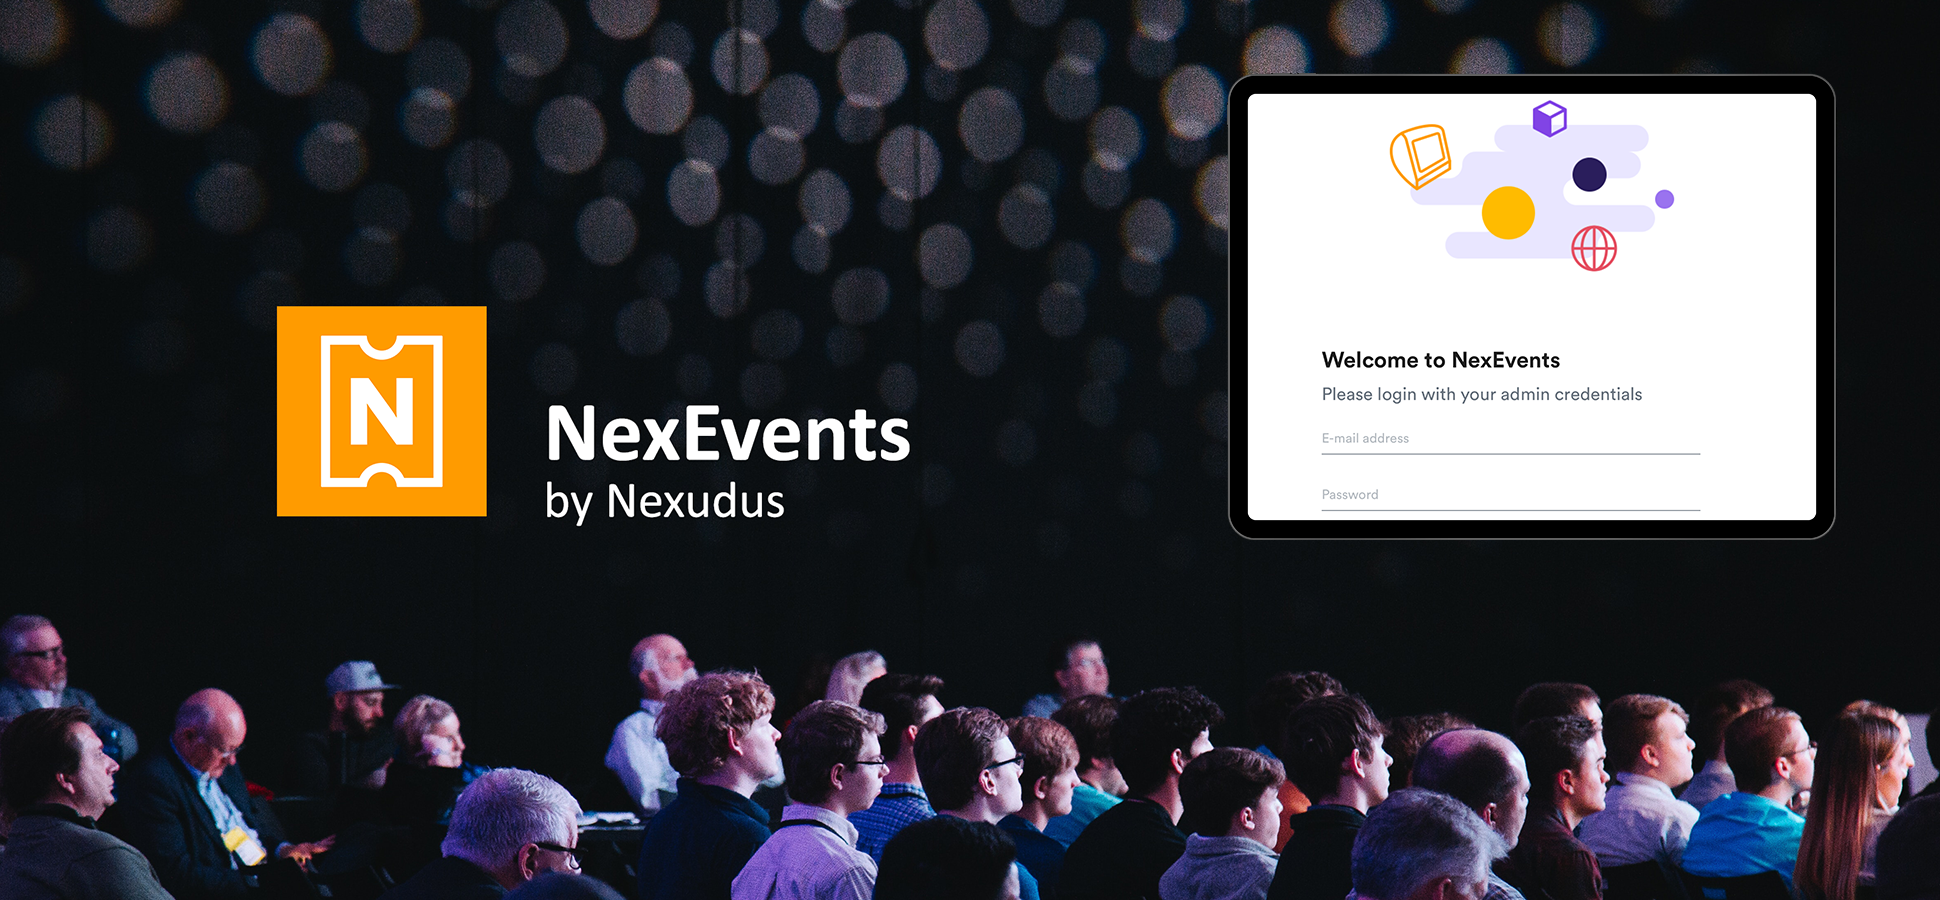 Want to speed up your events check-in process? Look no further than NexEvents. 